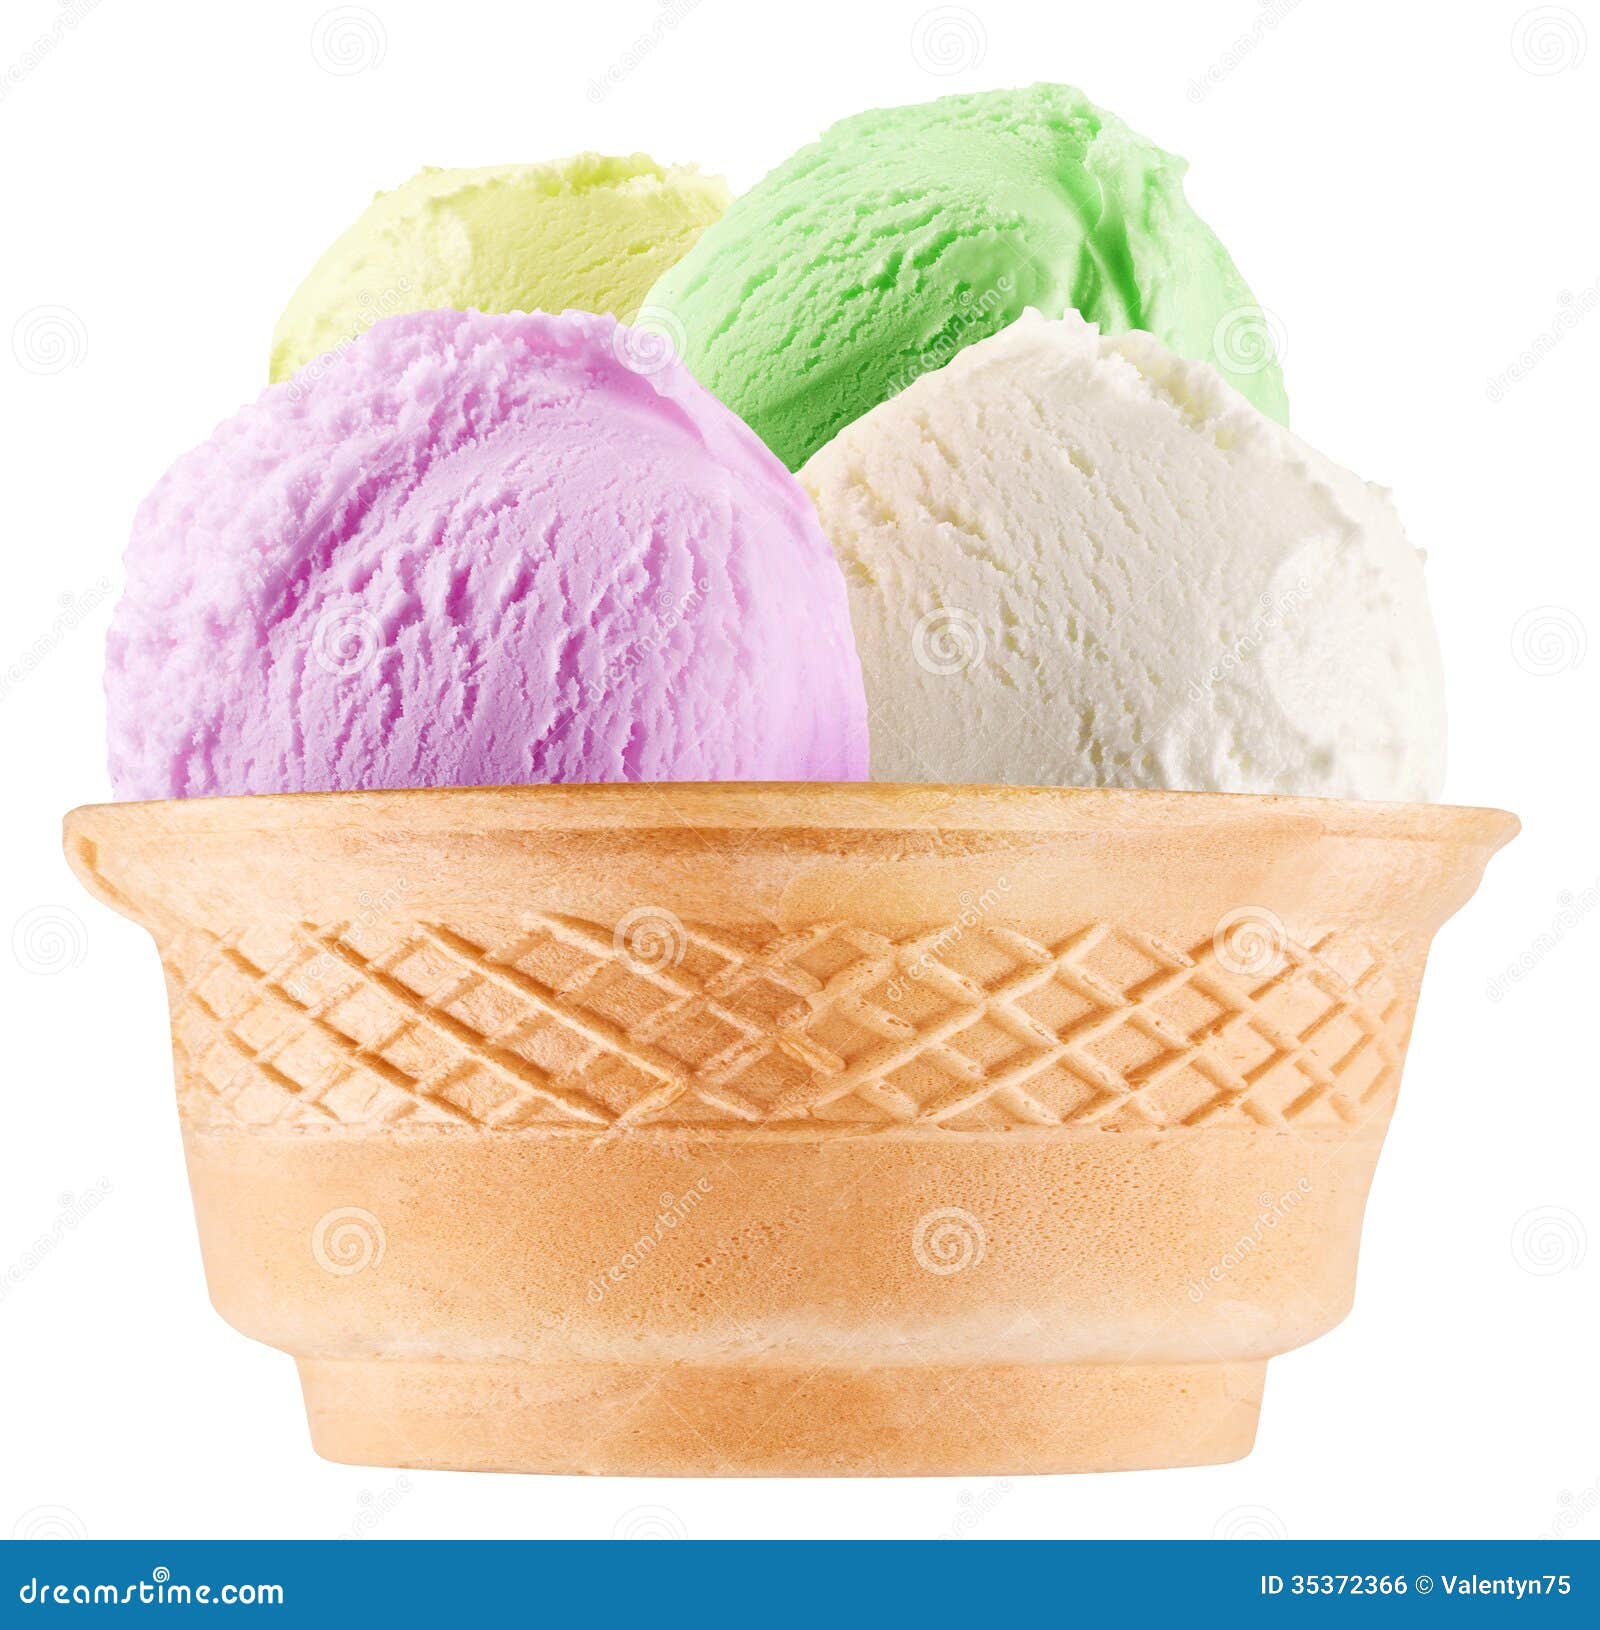 Ice-cream Scoops In Waffle Cup. Royalty Free Stock Image - Image: 35372366